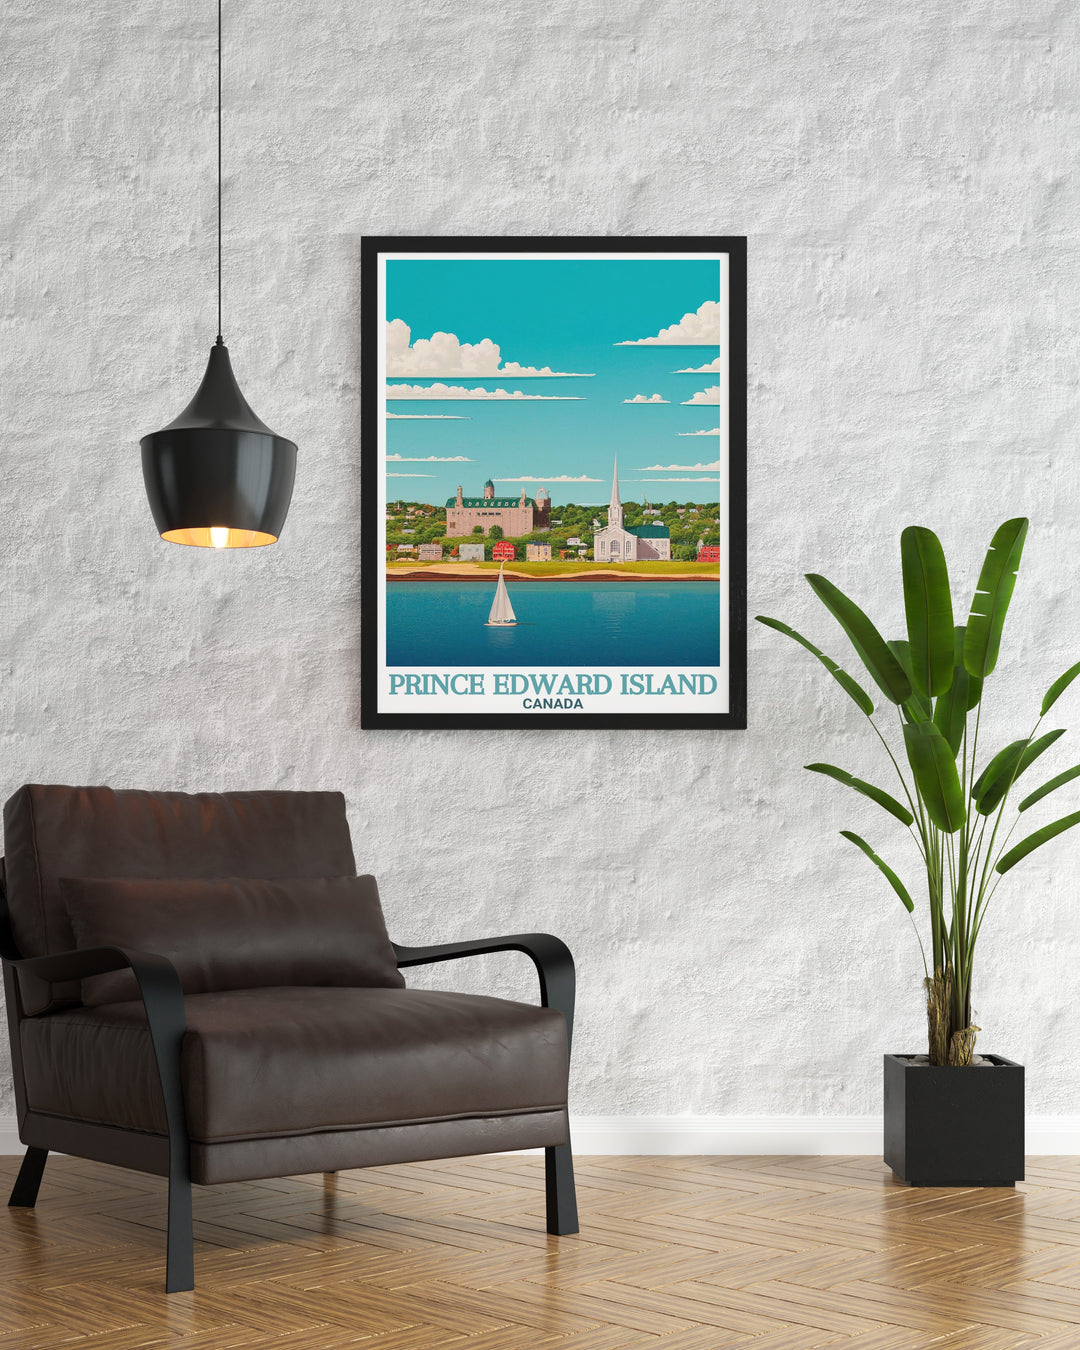 Elegant Charlottetown modern prints capturing the vibrant sunsets and iconic PEI lighthouse providing stylish and sophisticated home décor perfect for any living space ideal for those who appreciate modern art and serene landscapes.